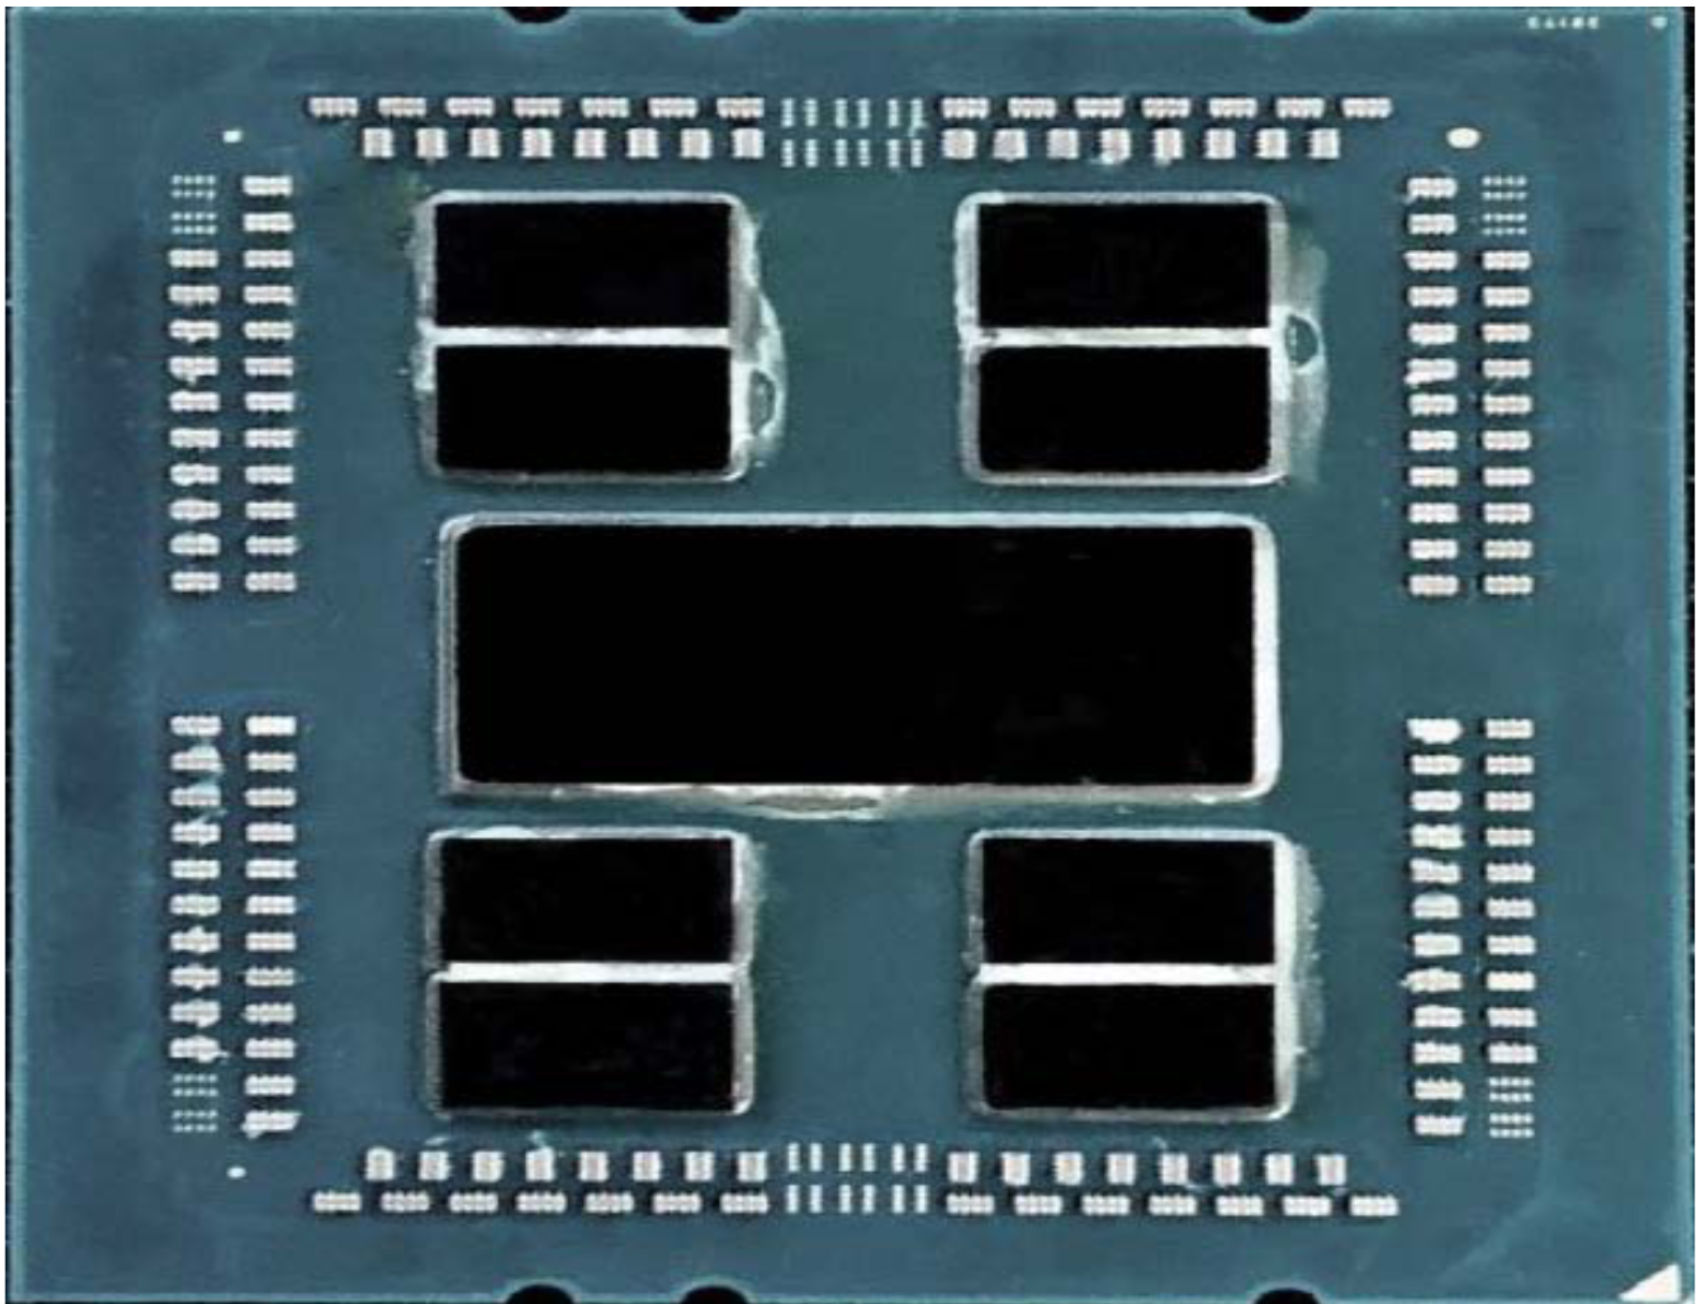 Photograph of a 7002 series AMD processor.